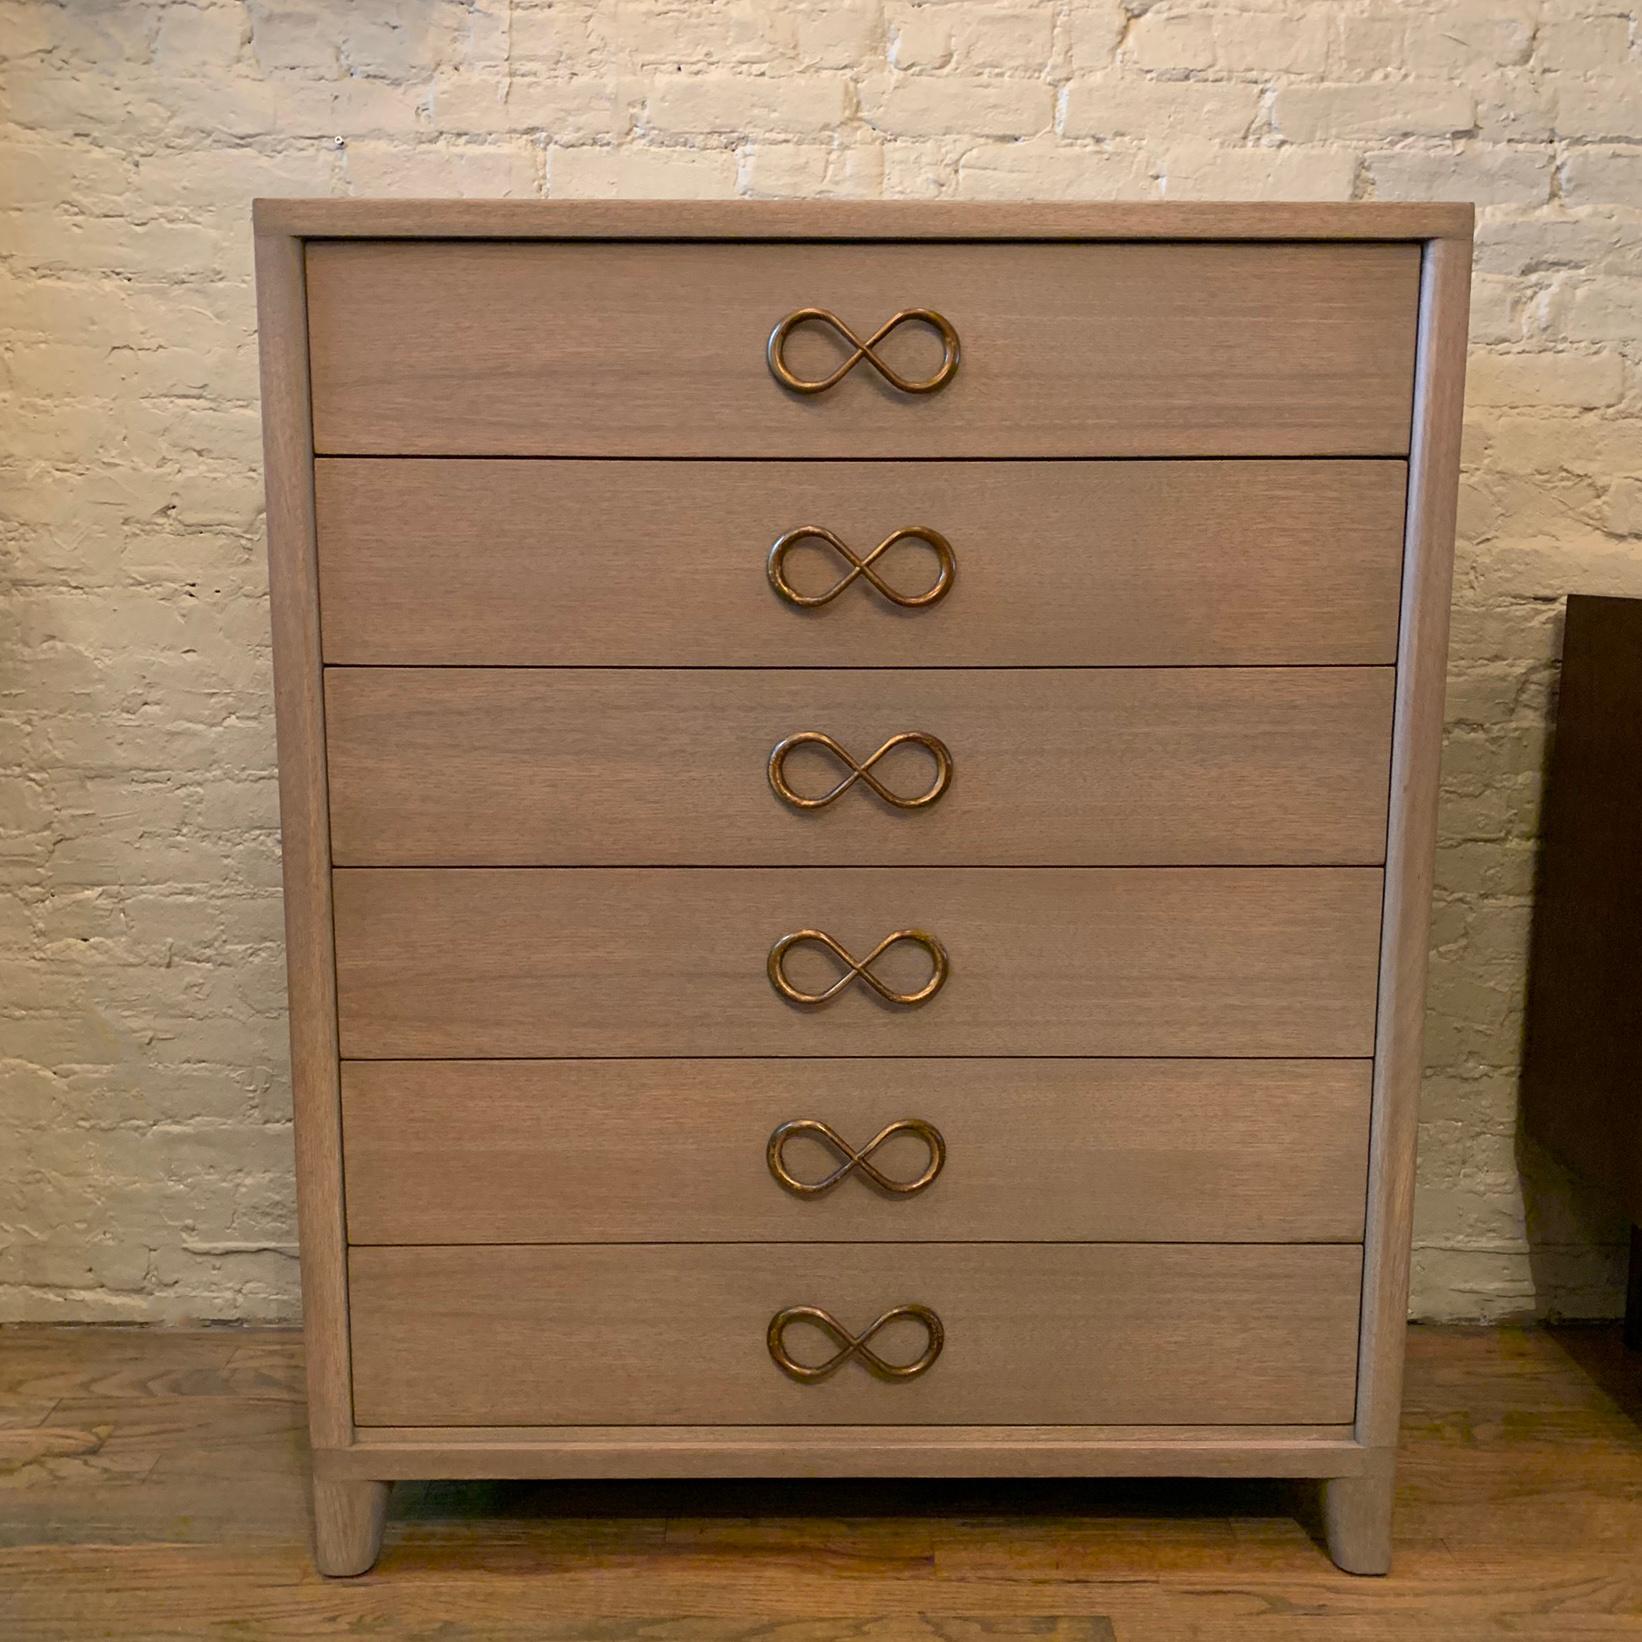 Midcentury, pickled mahogany, highboy dresser by Red Lion Furniture features decorative, figure eight, cast metal handles on all six drawers that are each 6.5 inches height. Two drawers feature dividers.